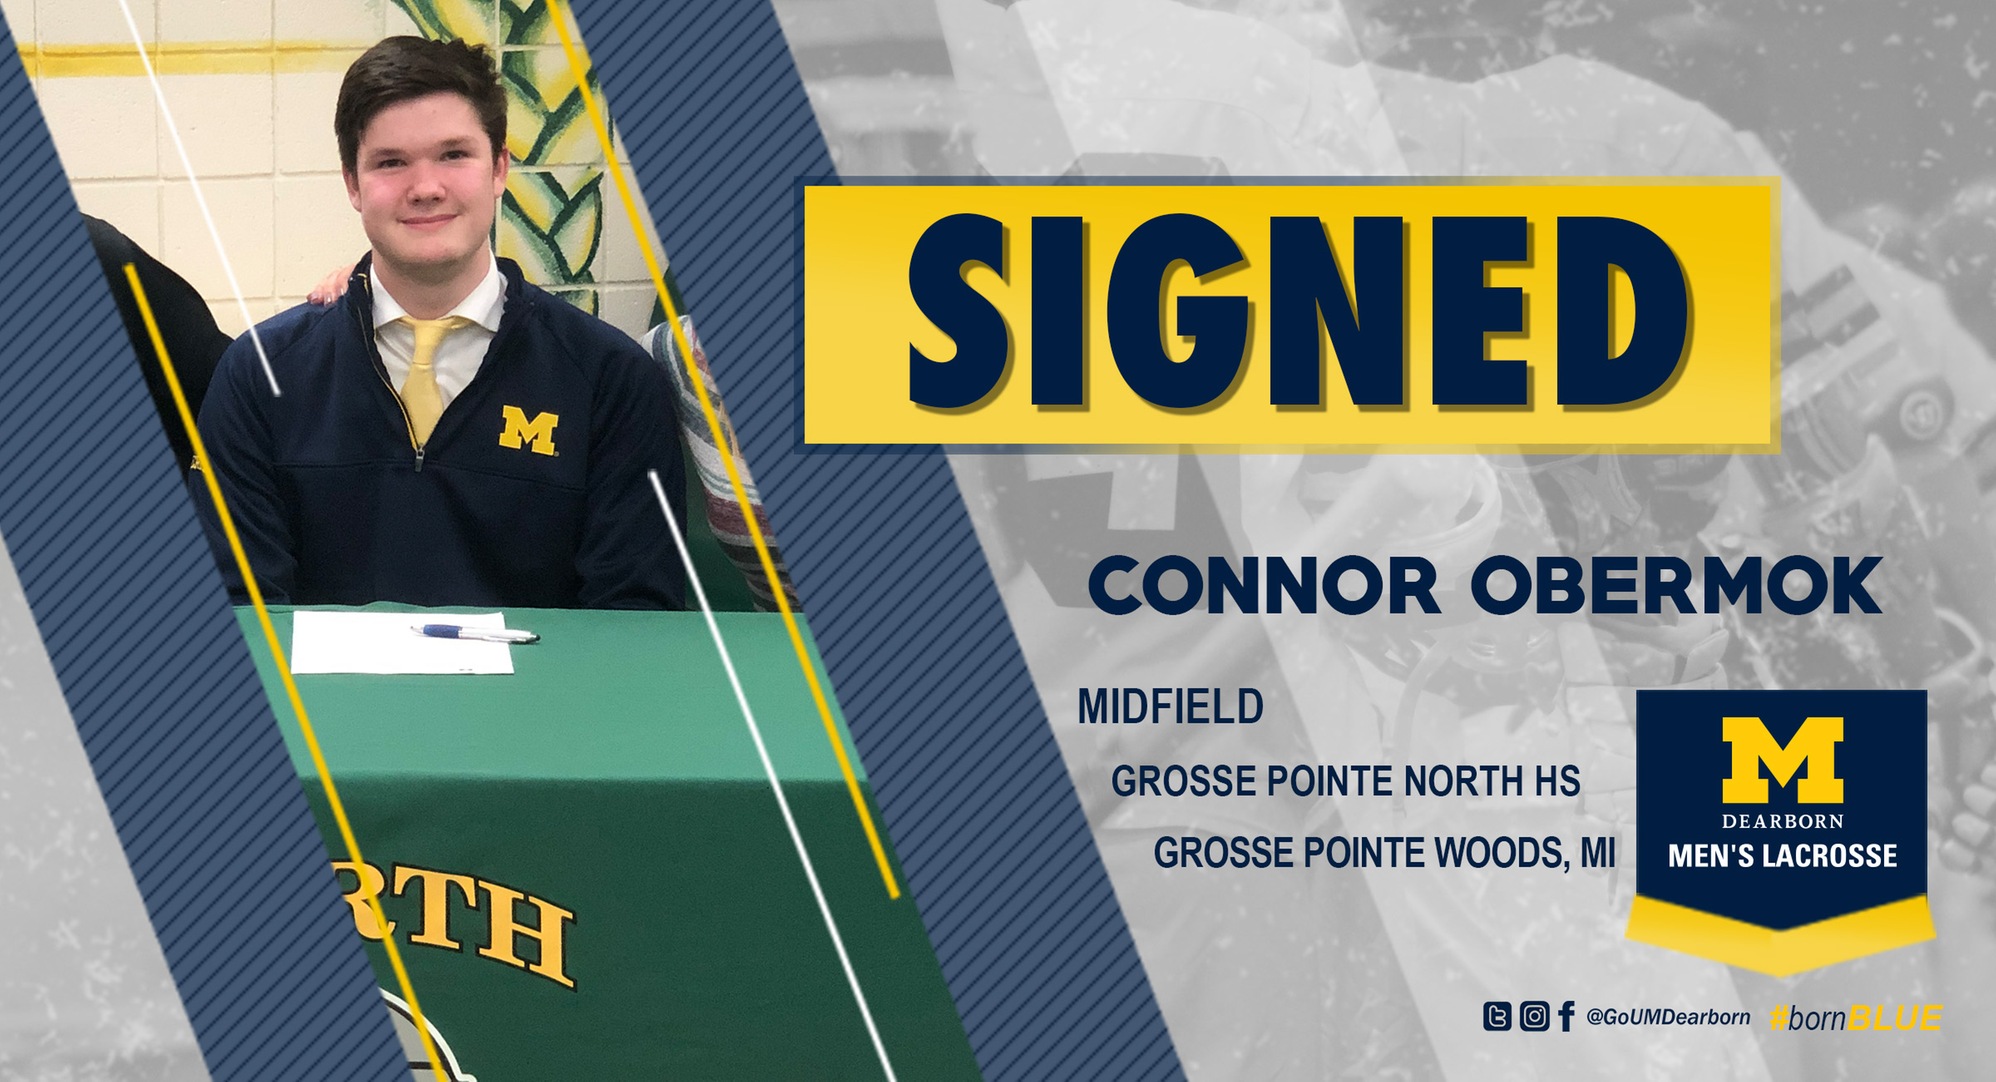 Obermok signs with Men's Lacrosse Class of 2020